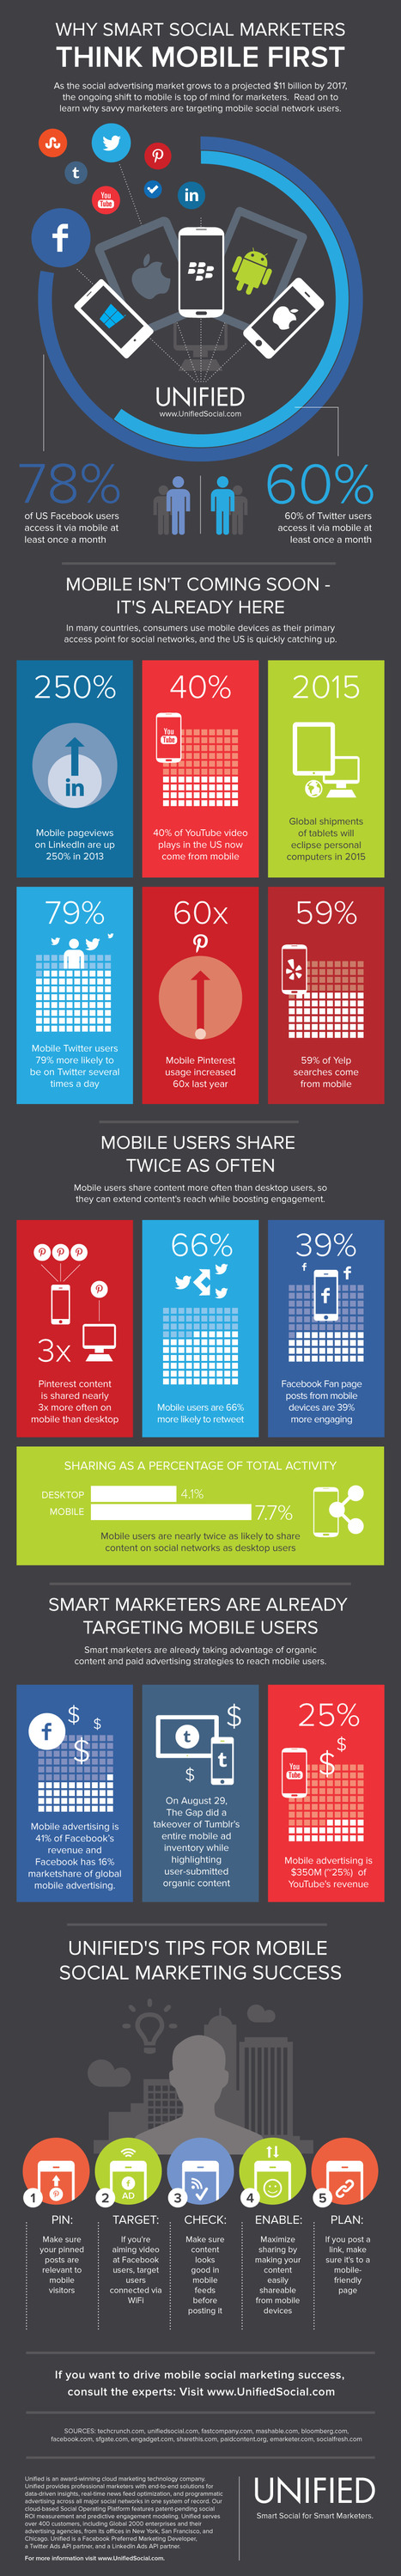 Why Smart Social Marketers Think Mobile First | Latest Social Media News | Scoop.it